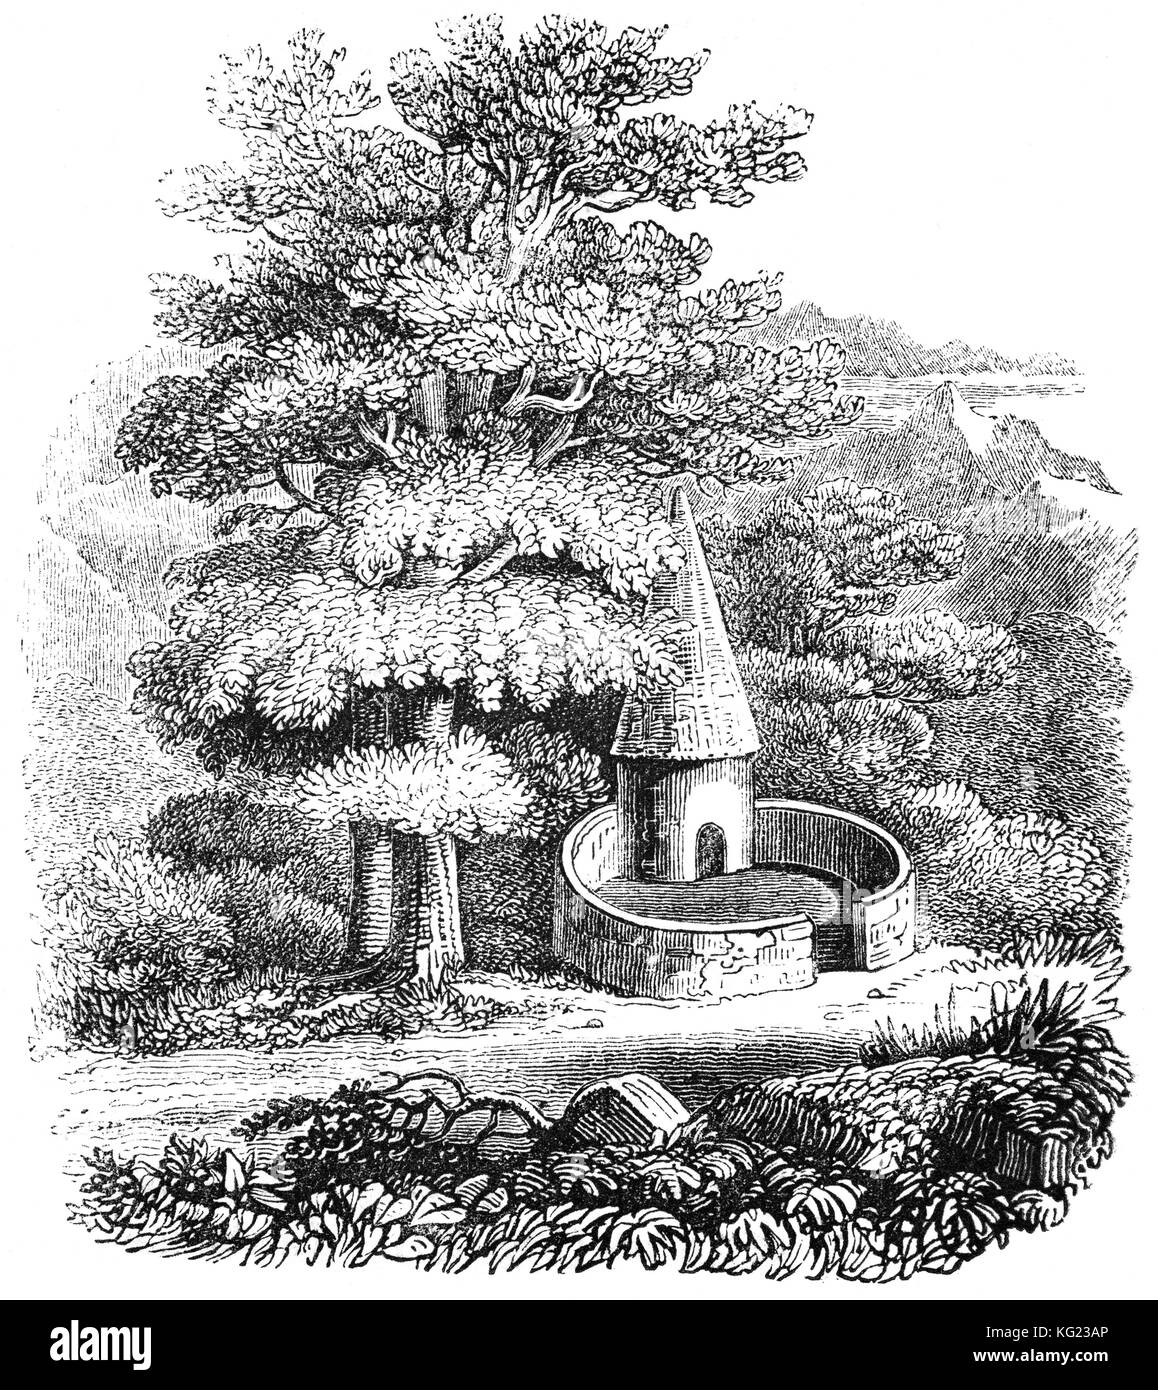 Circular pigsties were once common in south Wales. Most were probably built towards the end of the 18th century and during the early decades of the 19th century. The walls are of dry-stone construction and roof is corbelled - where each circle of stonework is gradually reduced until a dome-shaped structure is formed. United Kingdom Stock Photo